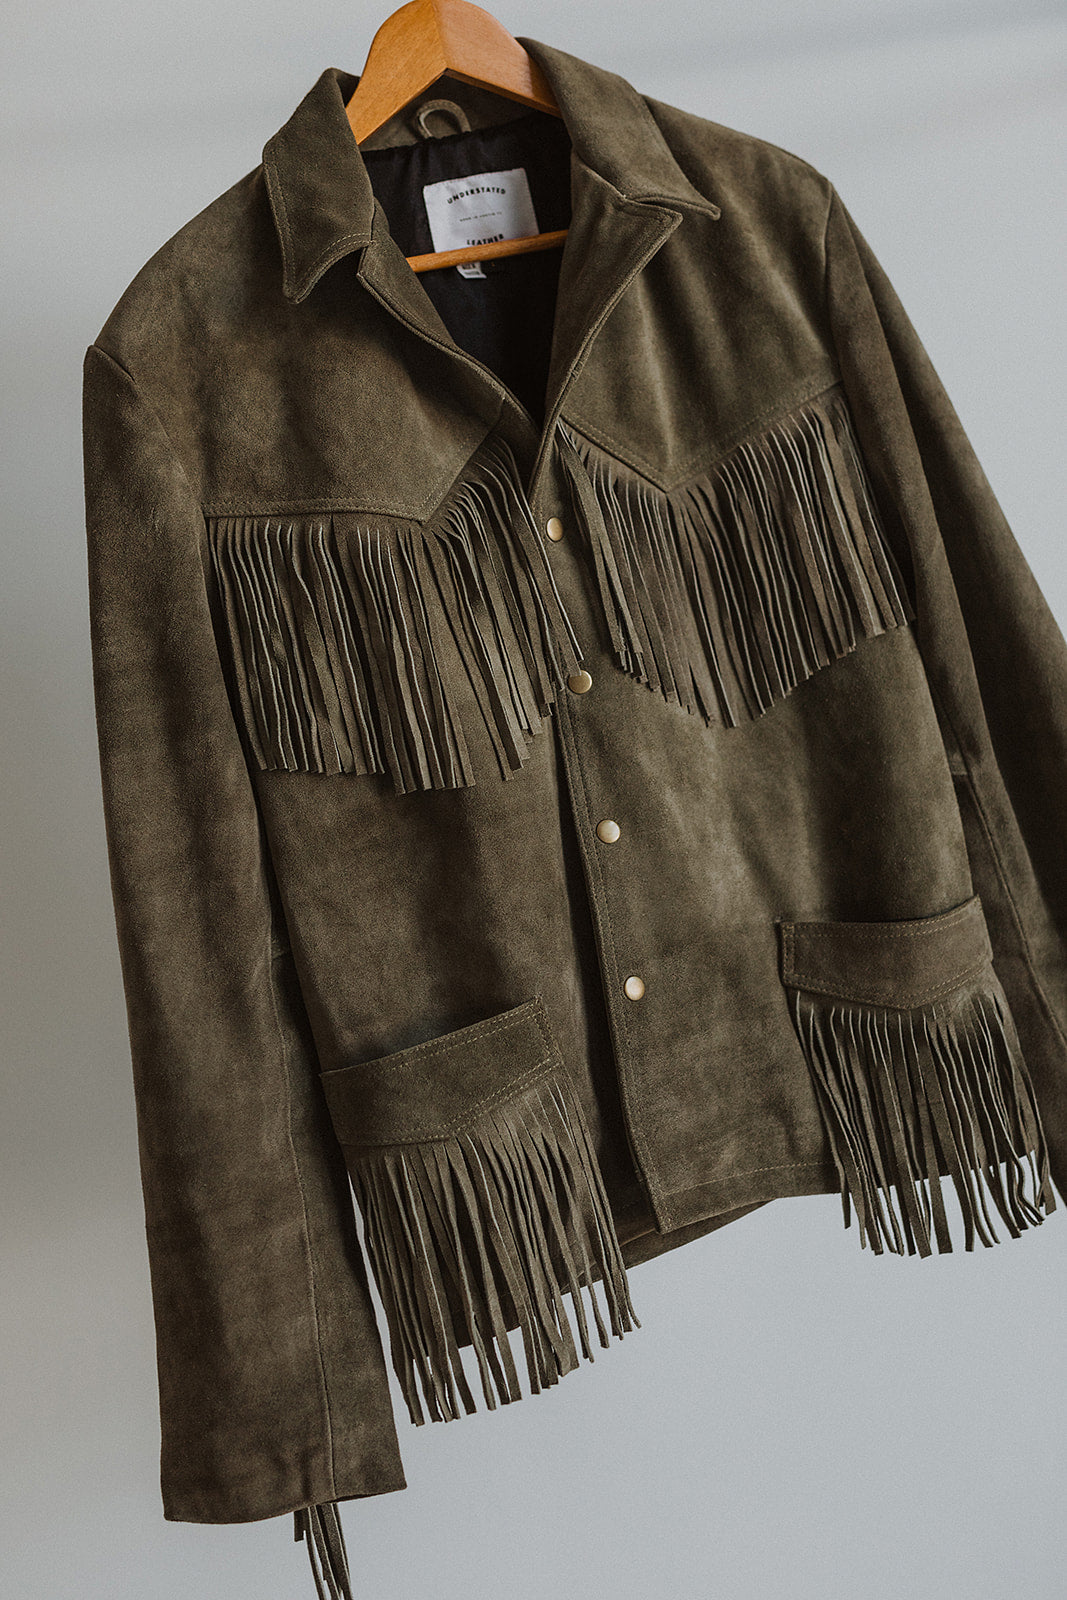 THE SAGE GIANT JACKET — Understated Leather